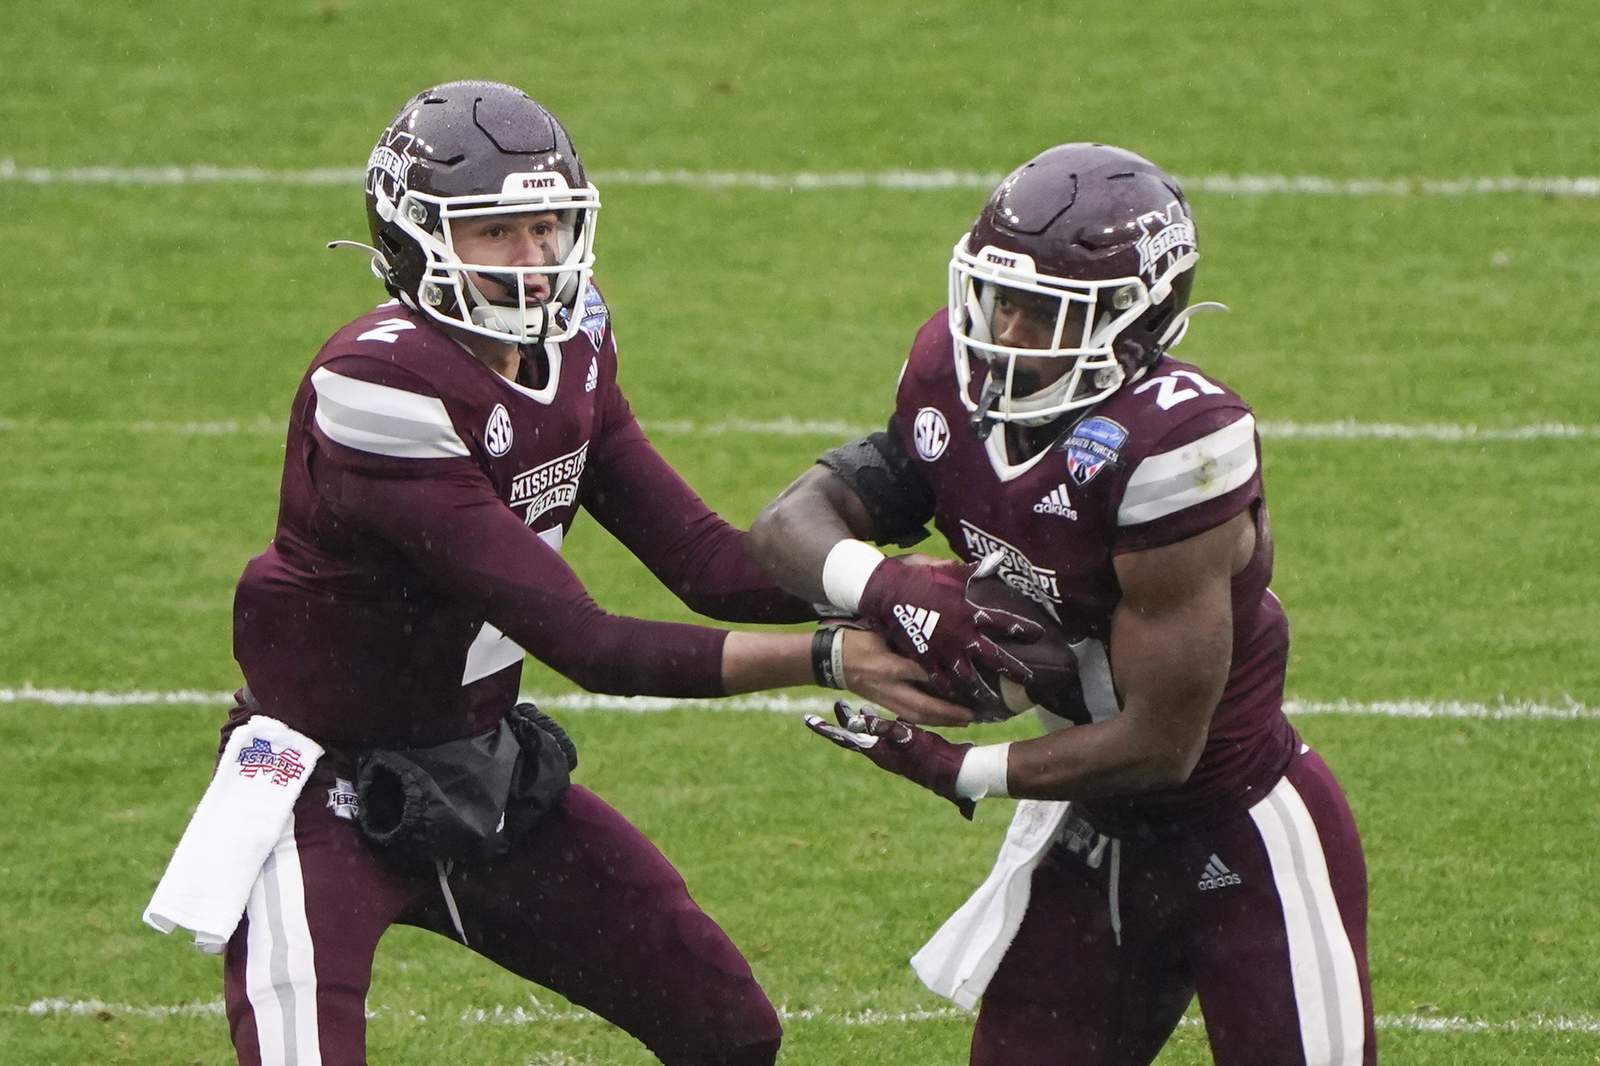 Brawl mars Mississippi State's Armed Forces win over Tulsa